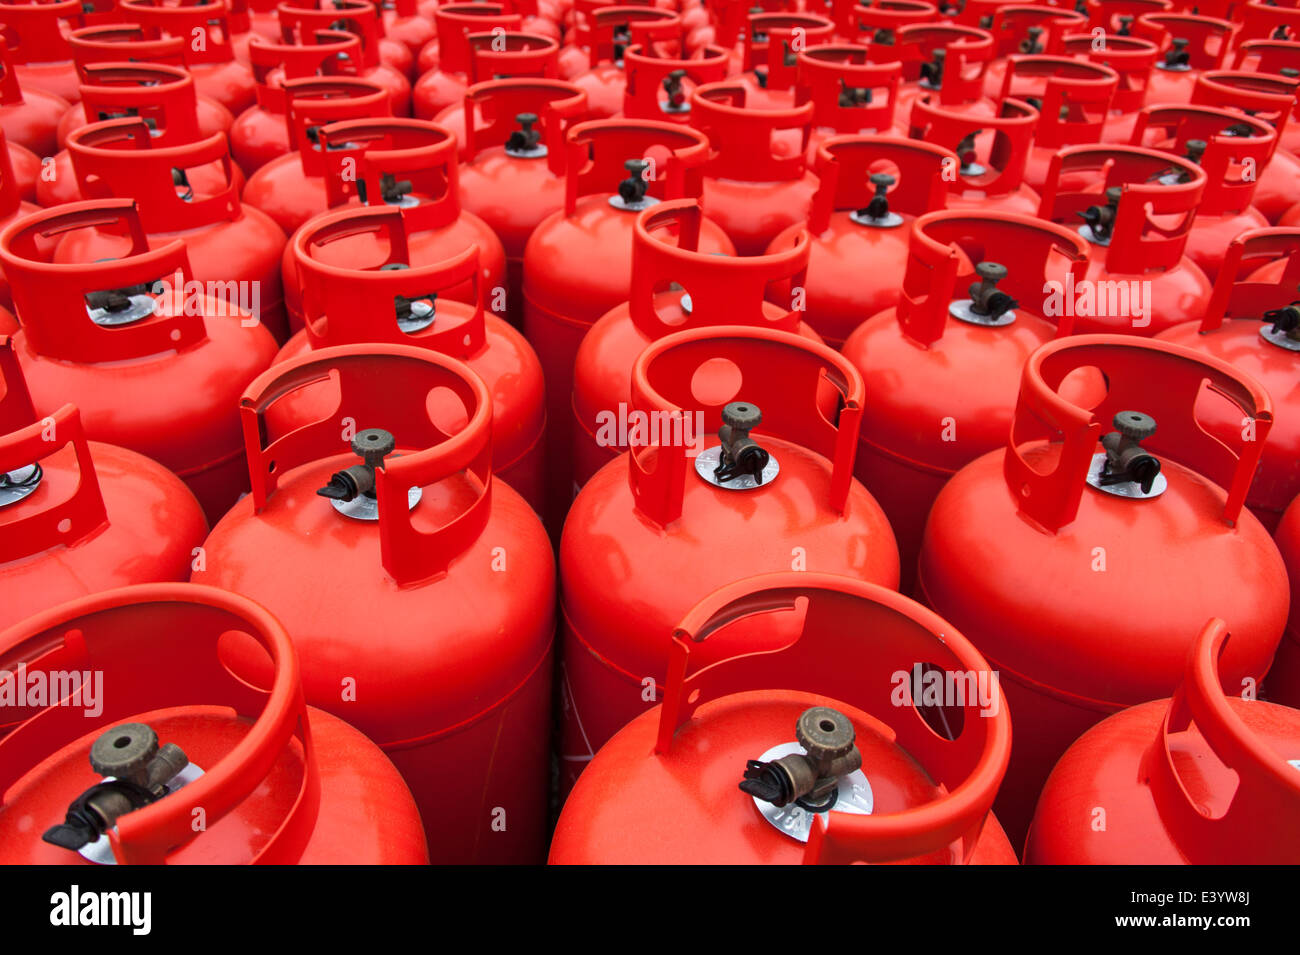 Details of red gas bottles stacked at a storage depot. Stock Photo